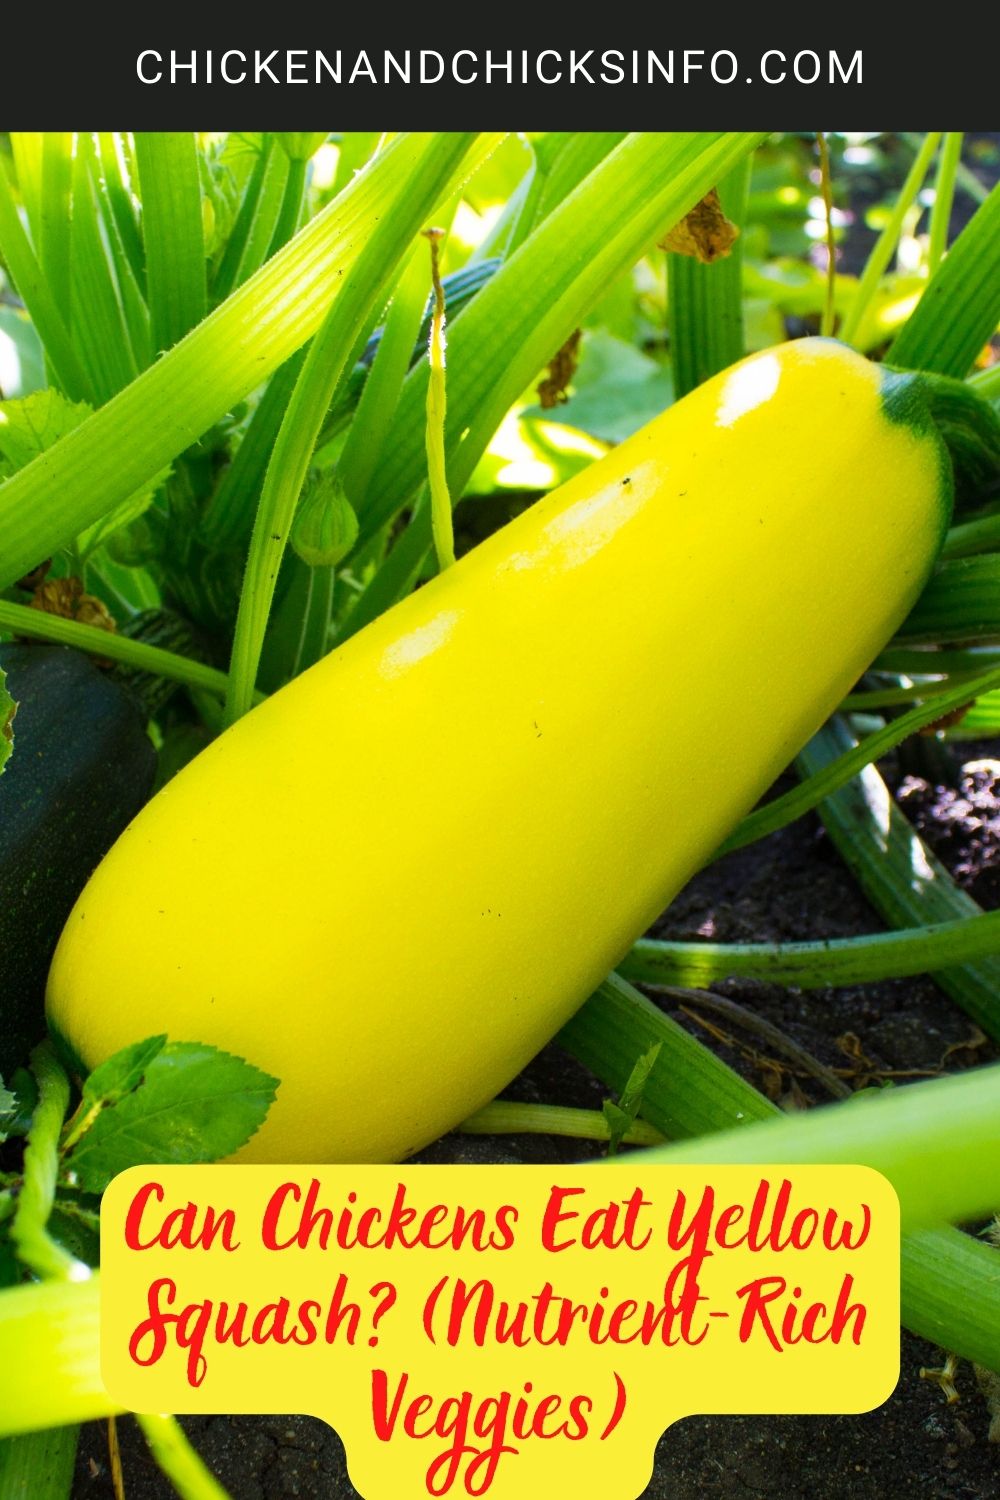 Can Chickens Eat Yellow Squash? (Nutrient-Rich Veggies) poster.
